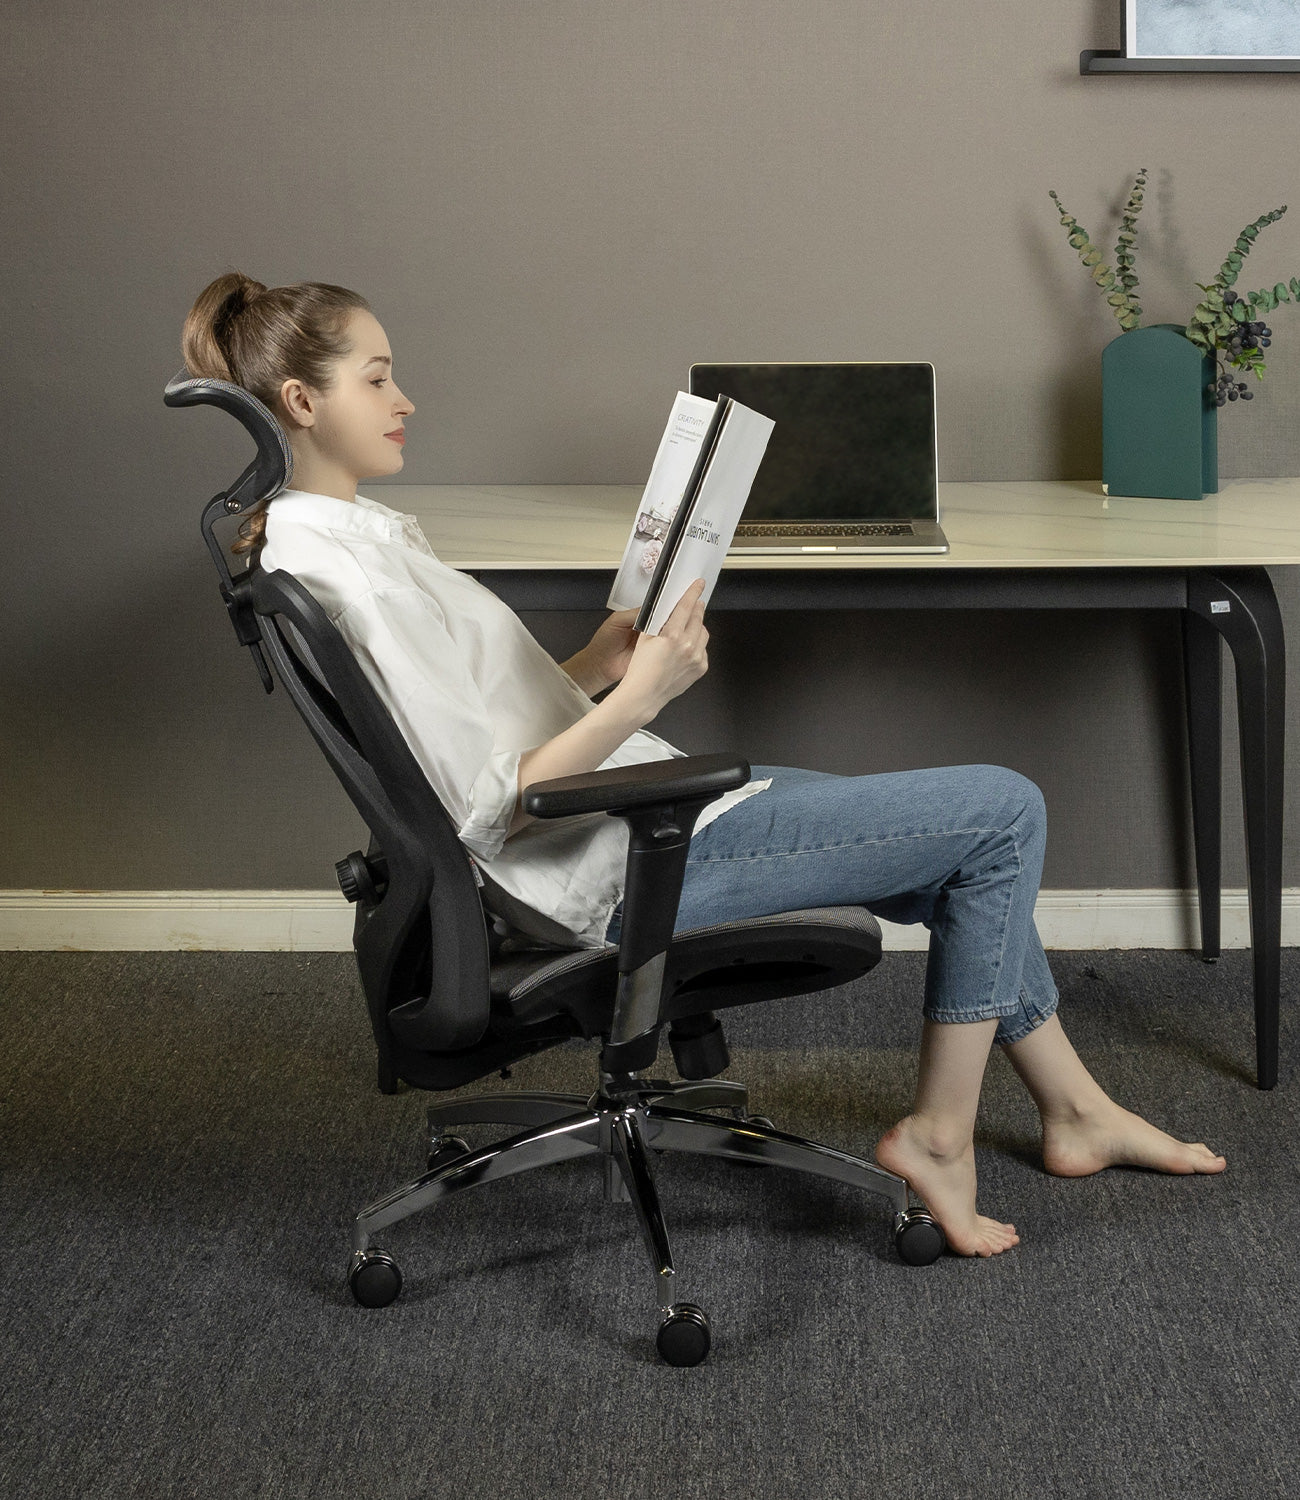 SIHOO M57 Ergonomic Mesh Office Chair-Shop Now At SIHOO® Official